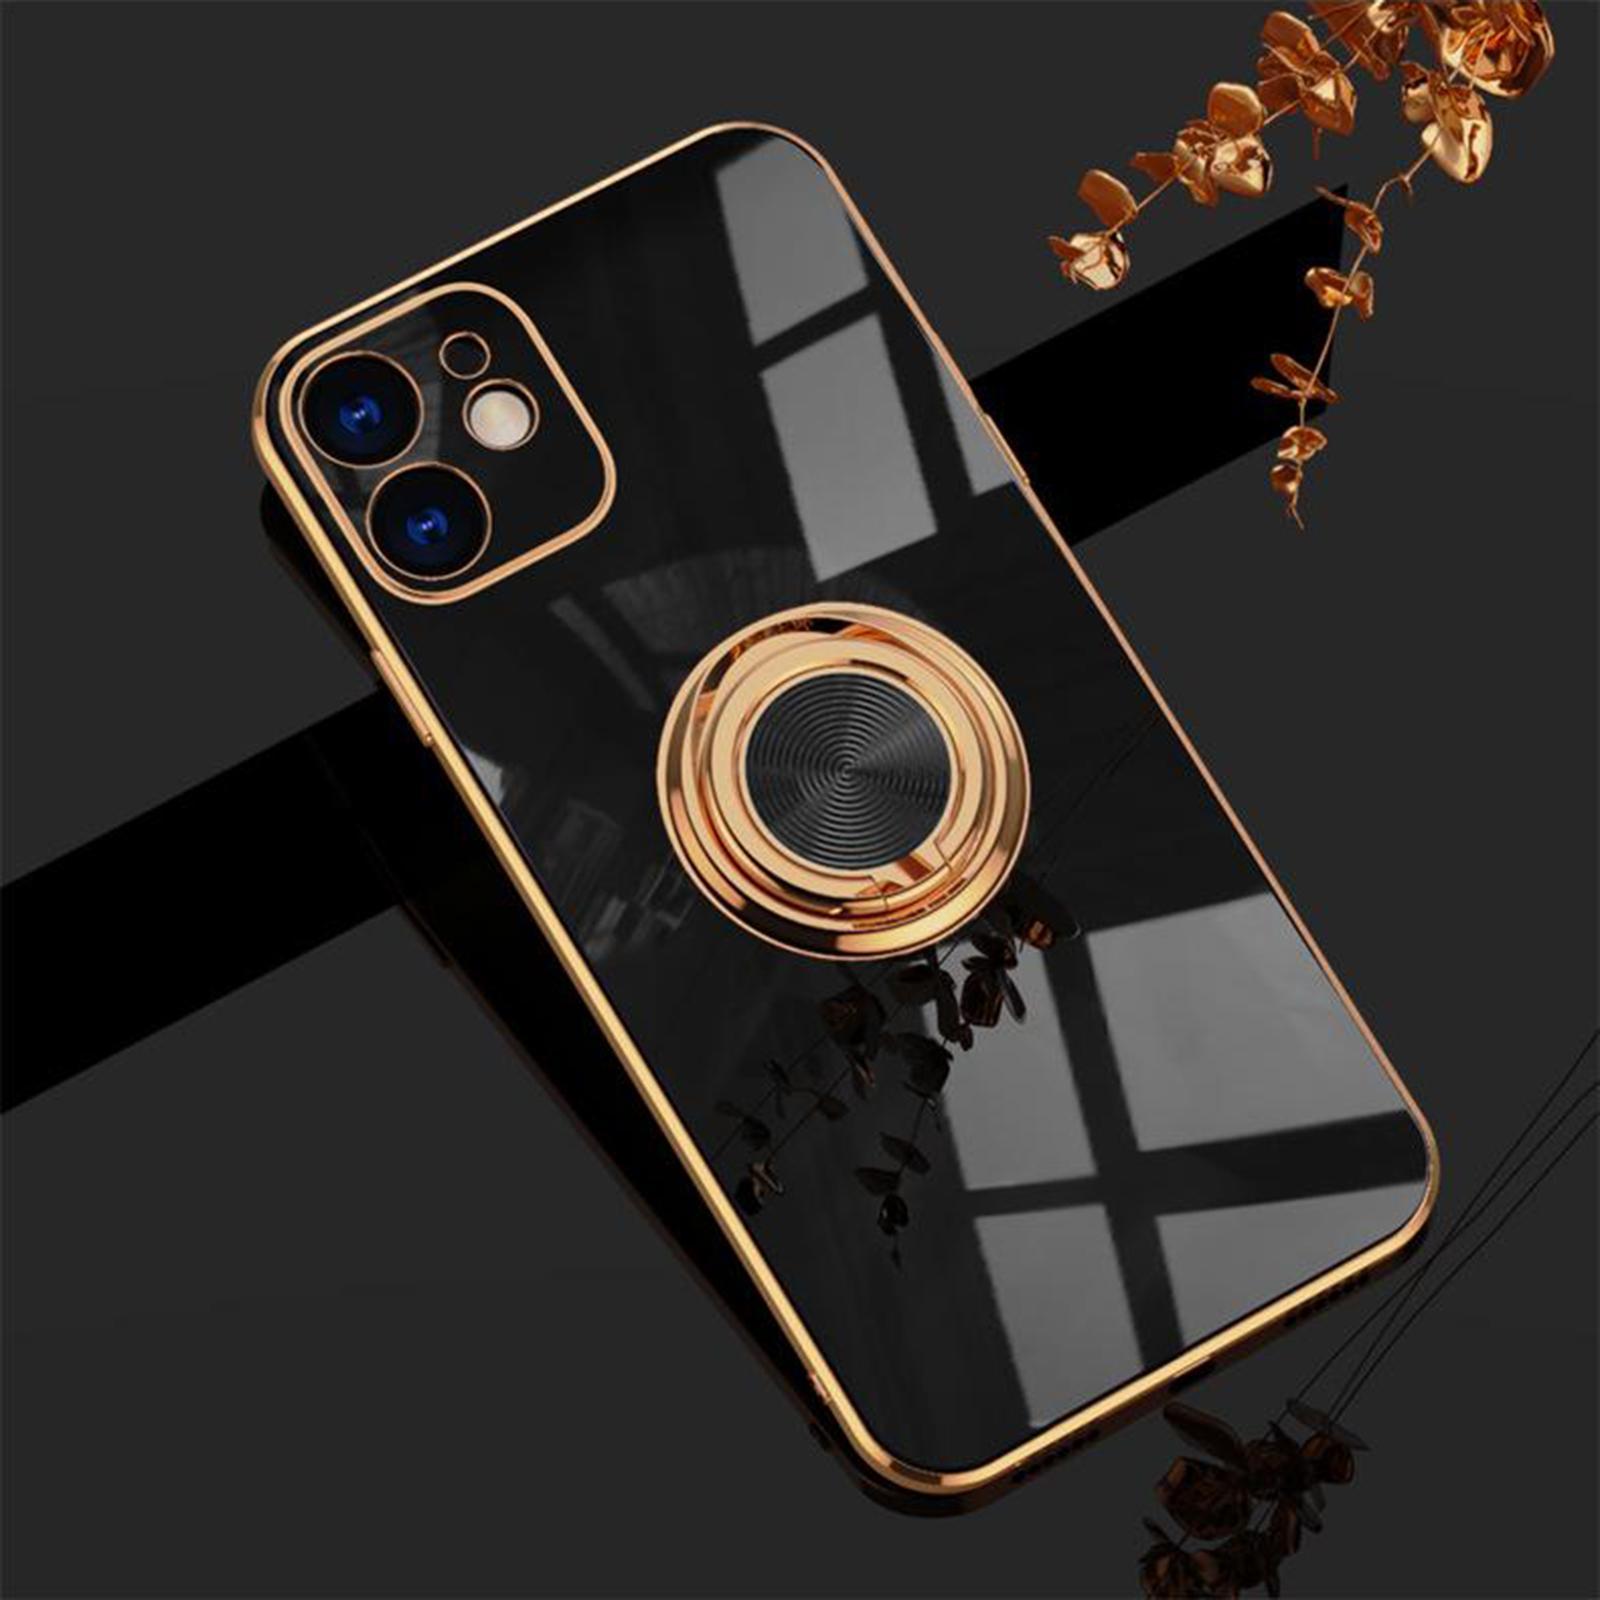 Waterproof TPU Case Cover Phone Bumper Full Protection for iPhone 12 Pro Max